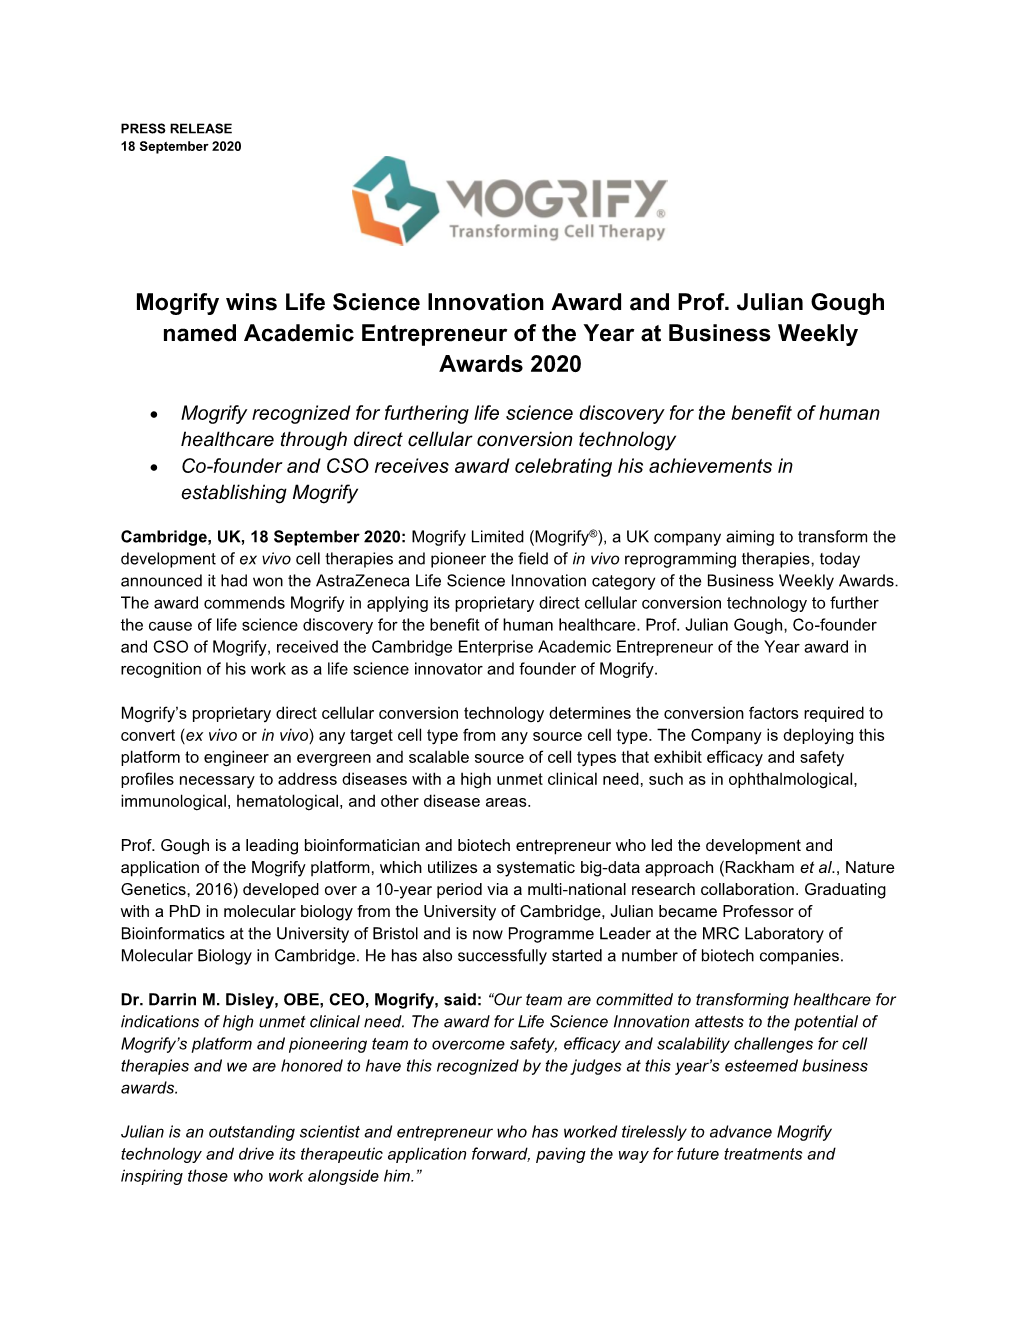 Mogrify Wins Life Science Innovation Award and Prof. Julian Gough Named Academic Entrepreneur of the Year at Business Weekly Awards 2020